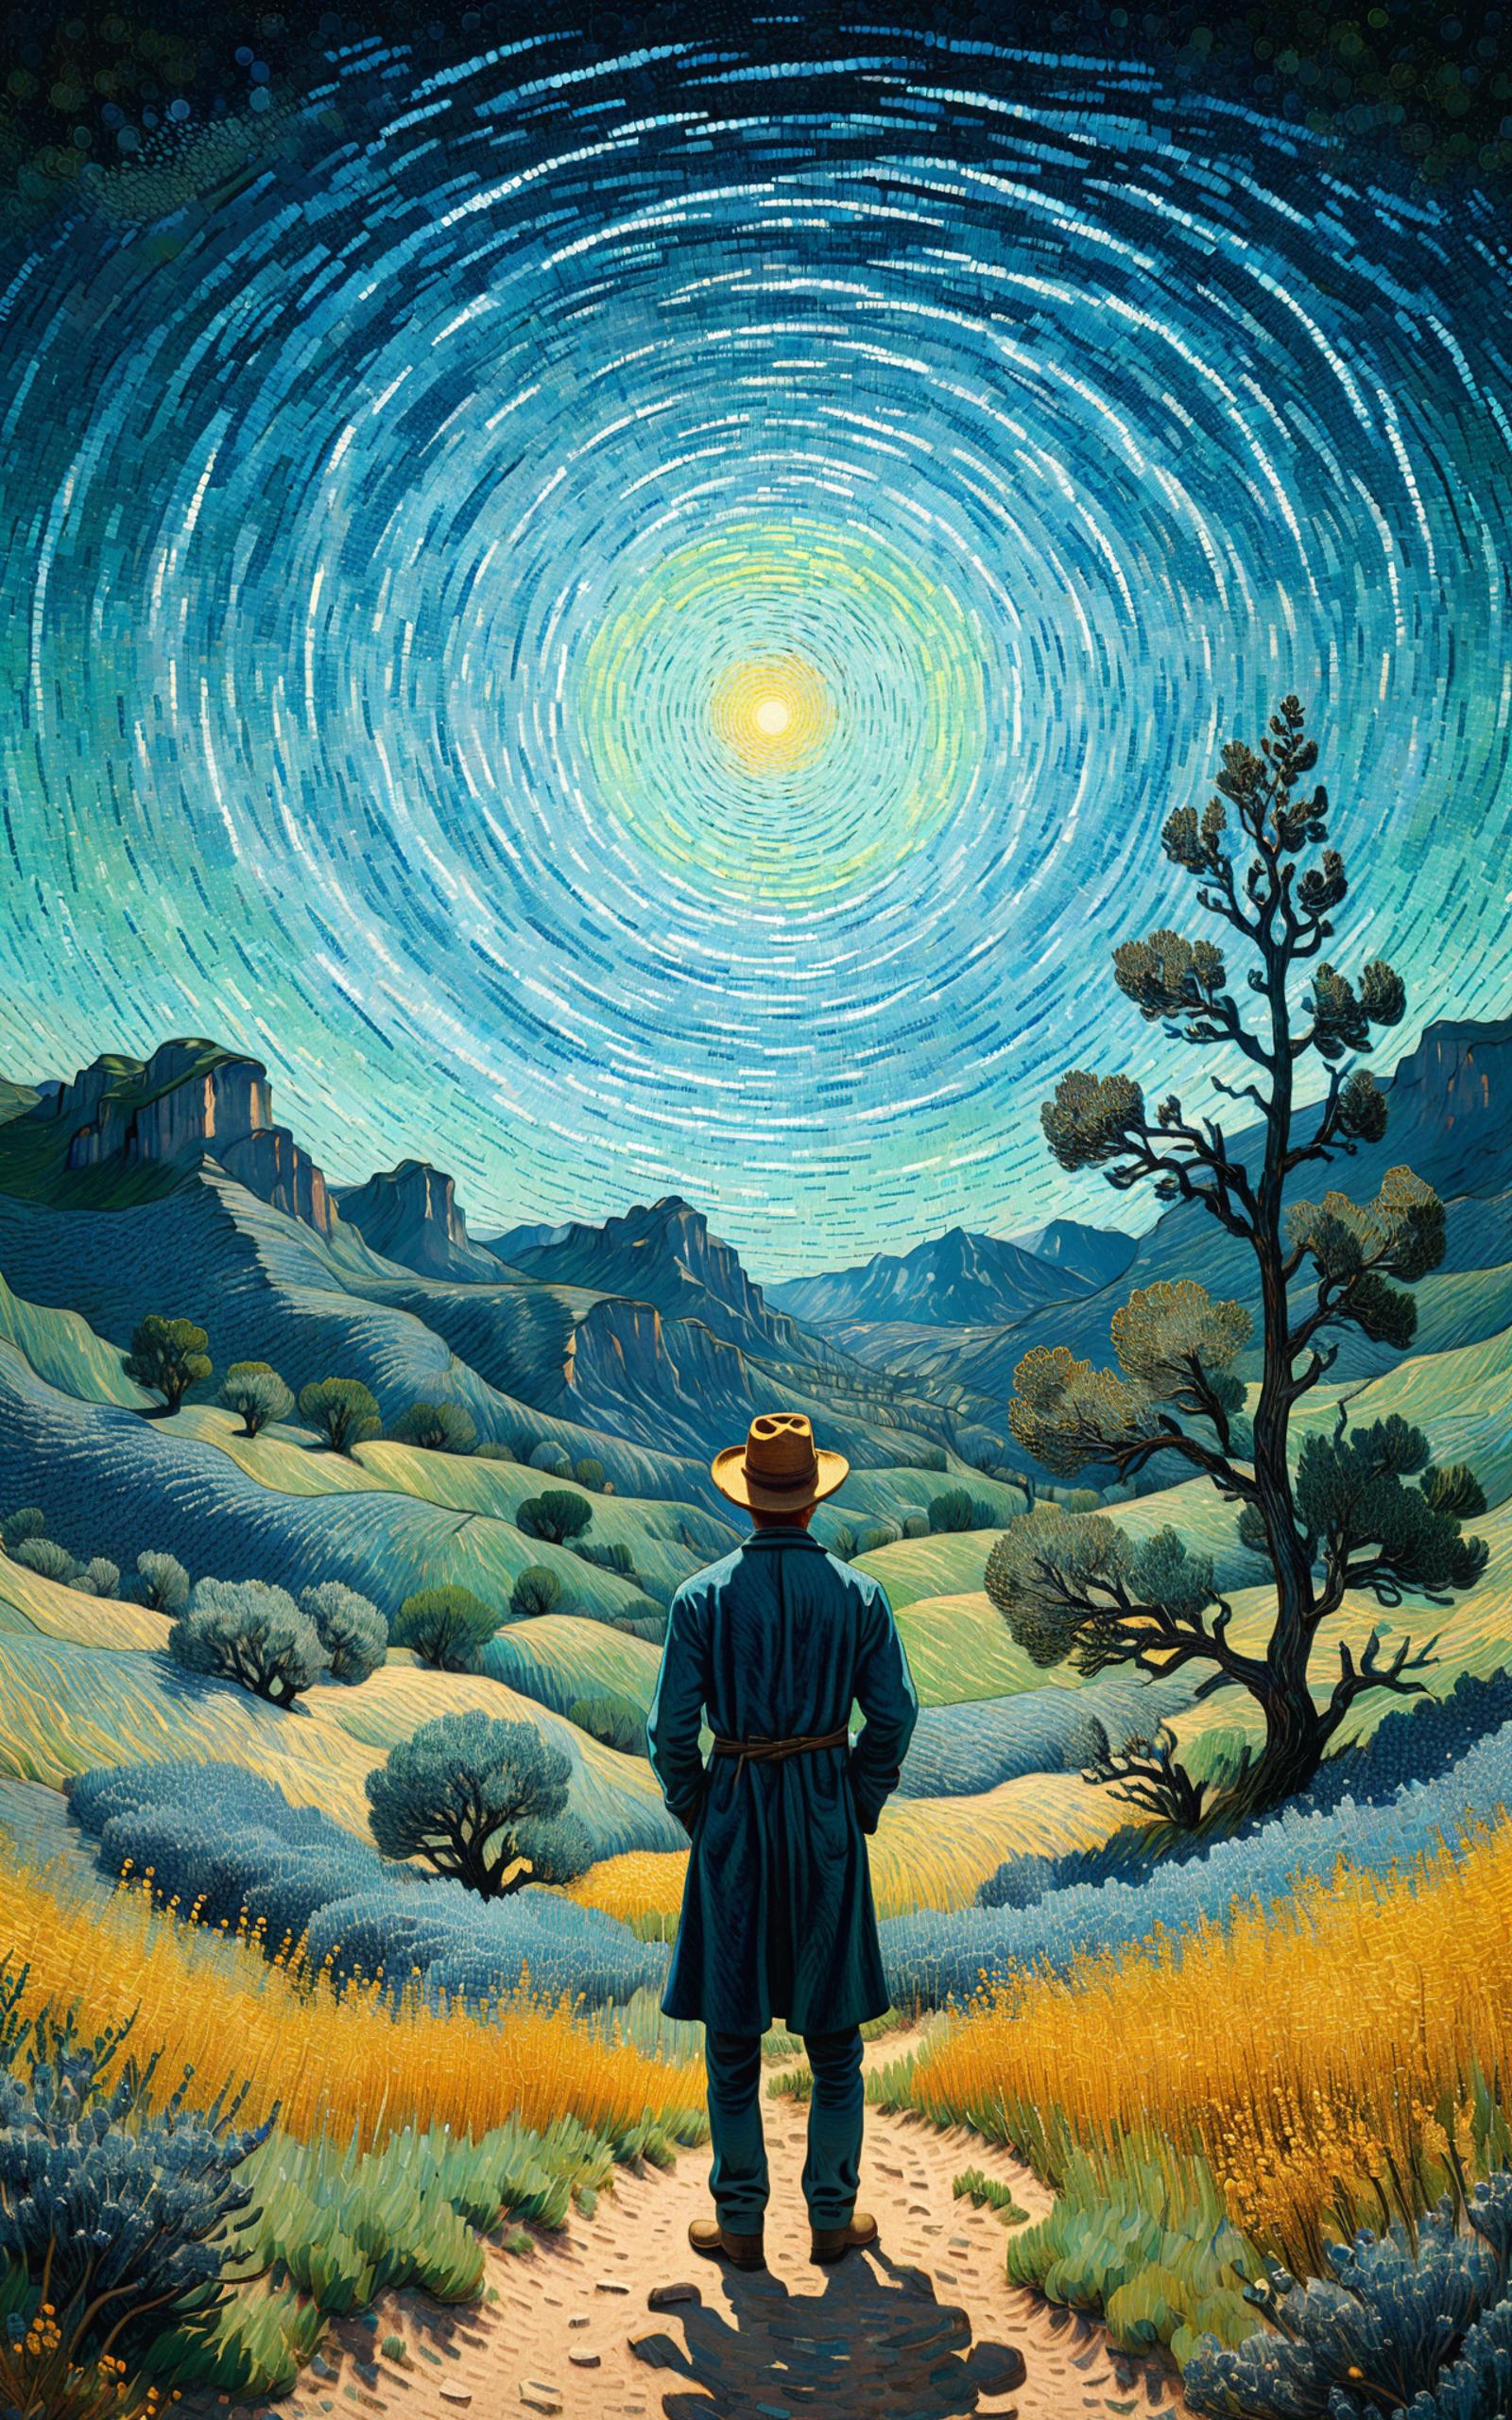 A man standing in a field under a starry sky.